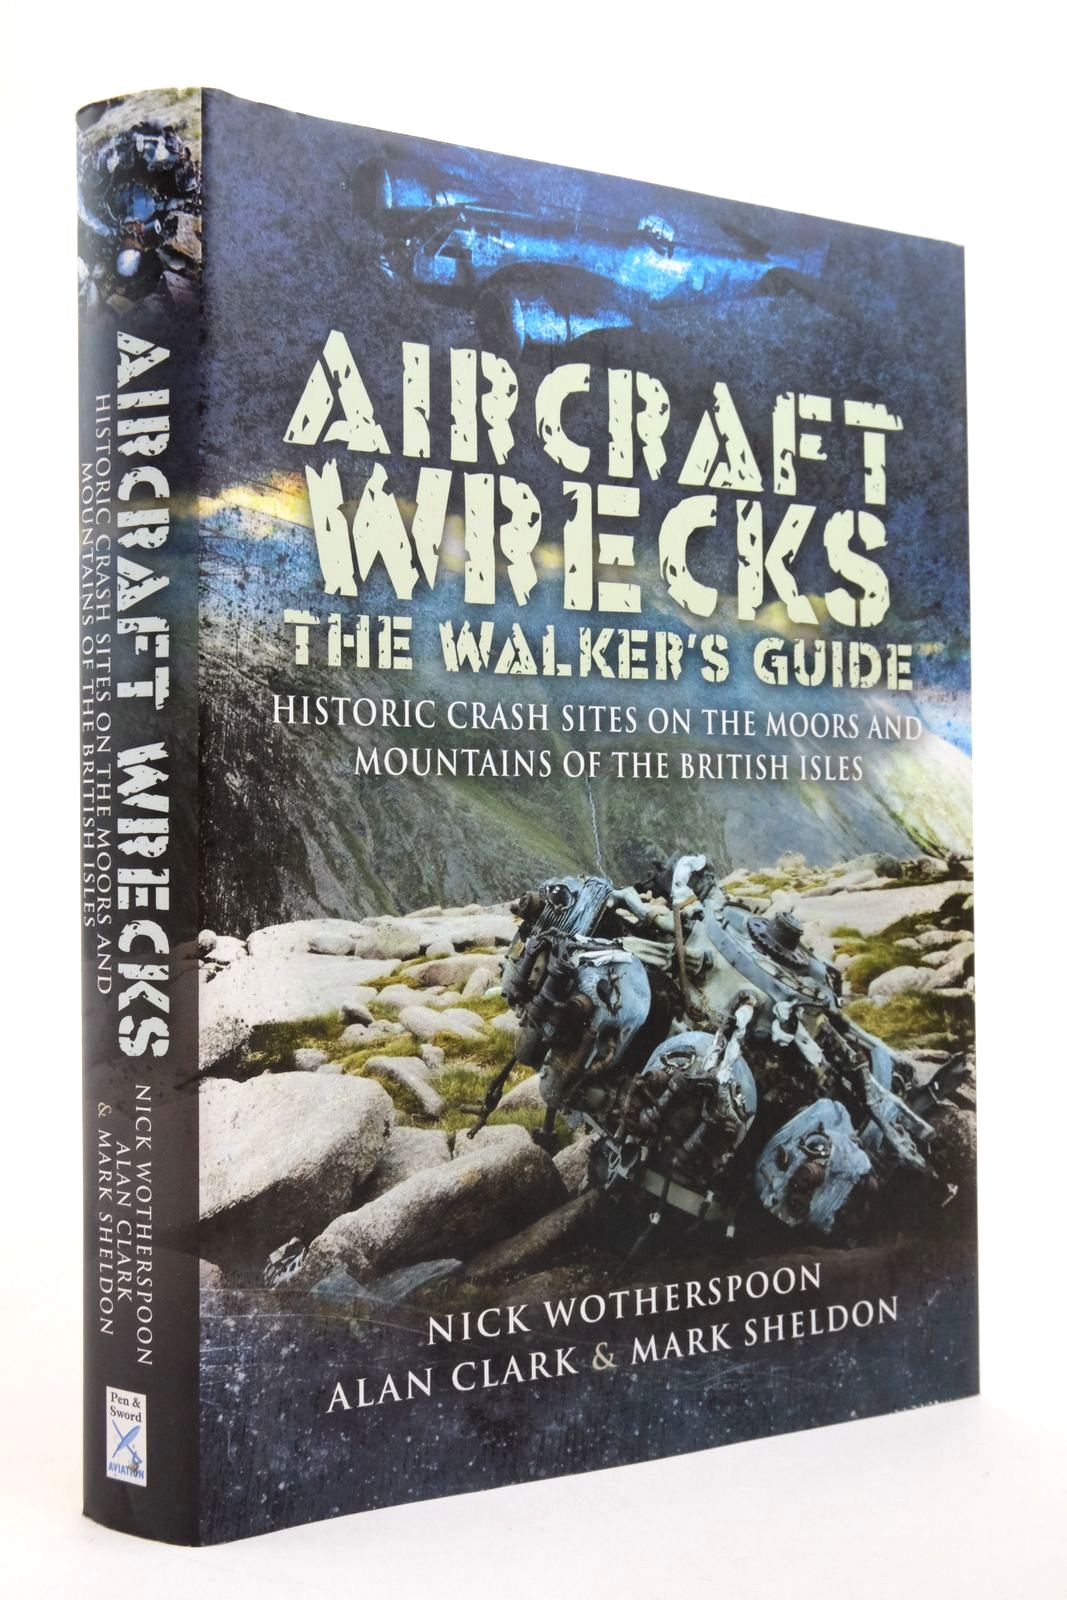 Photo of AIRCRAFT WRECKS THE WALKERS GUIDE: HISTORIC CRASH SITES ON THE MOORS AND MOUNTAINS OF THE BRITISH ISLES- Stock Number: 2138873